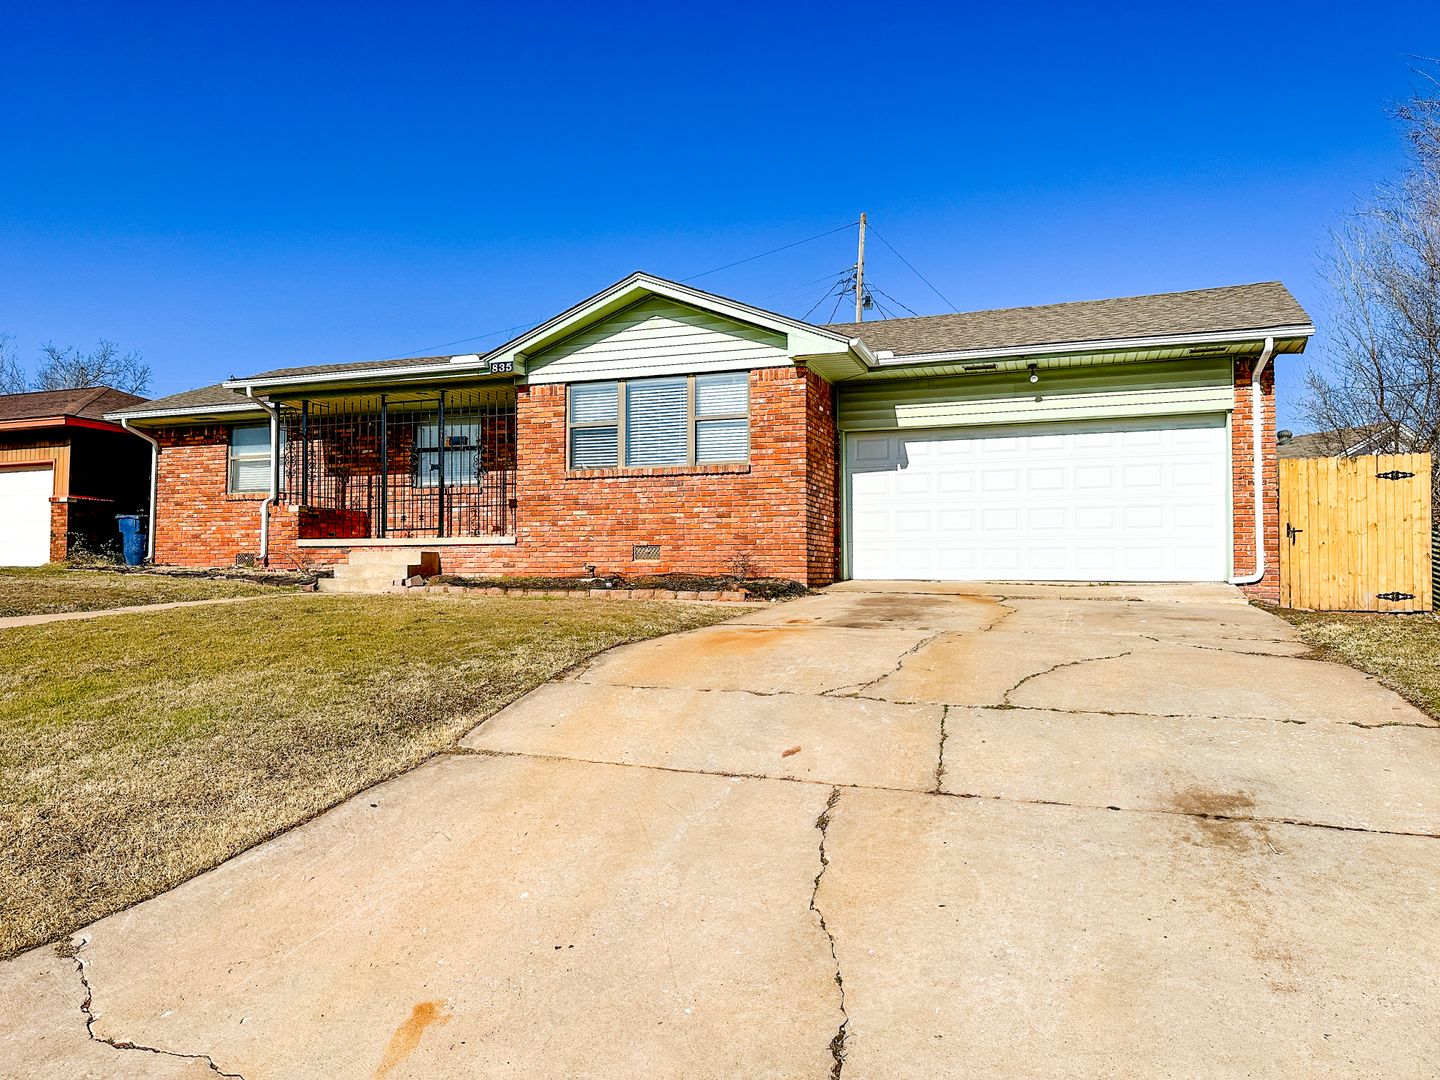 Fully Updated 3 Bed/1 Bath with a two car attached garage!